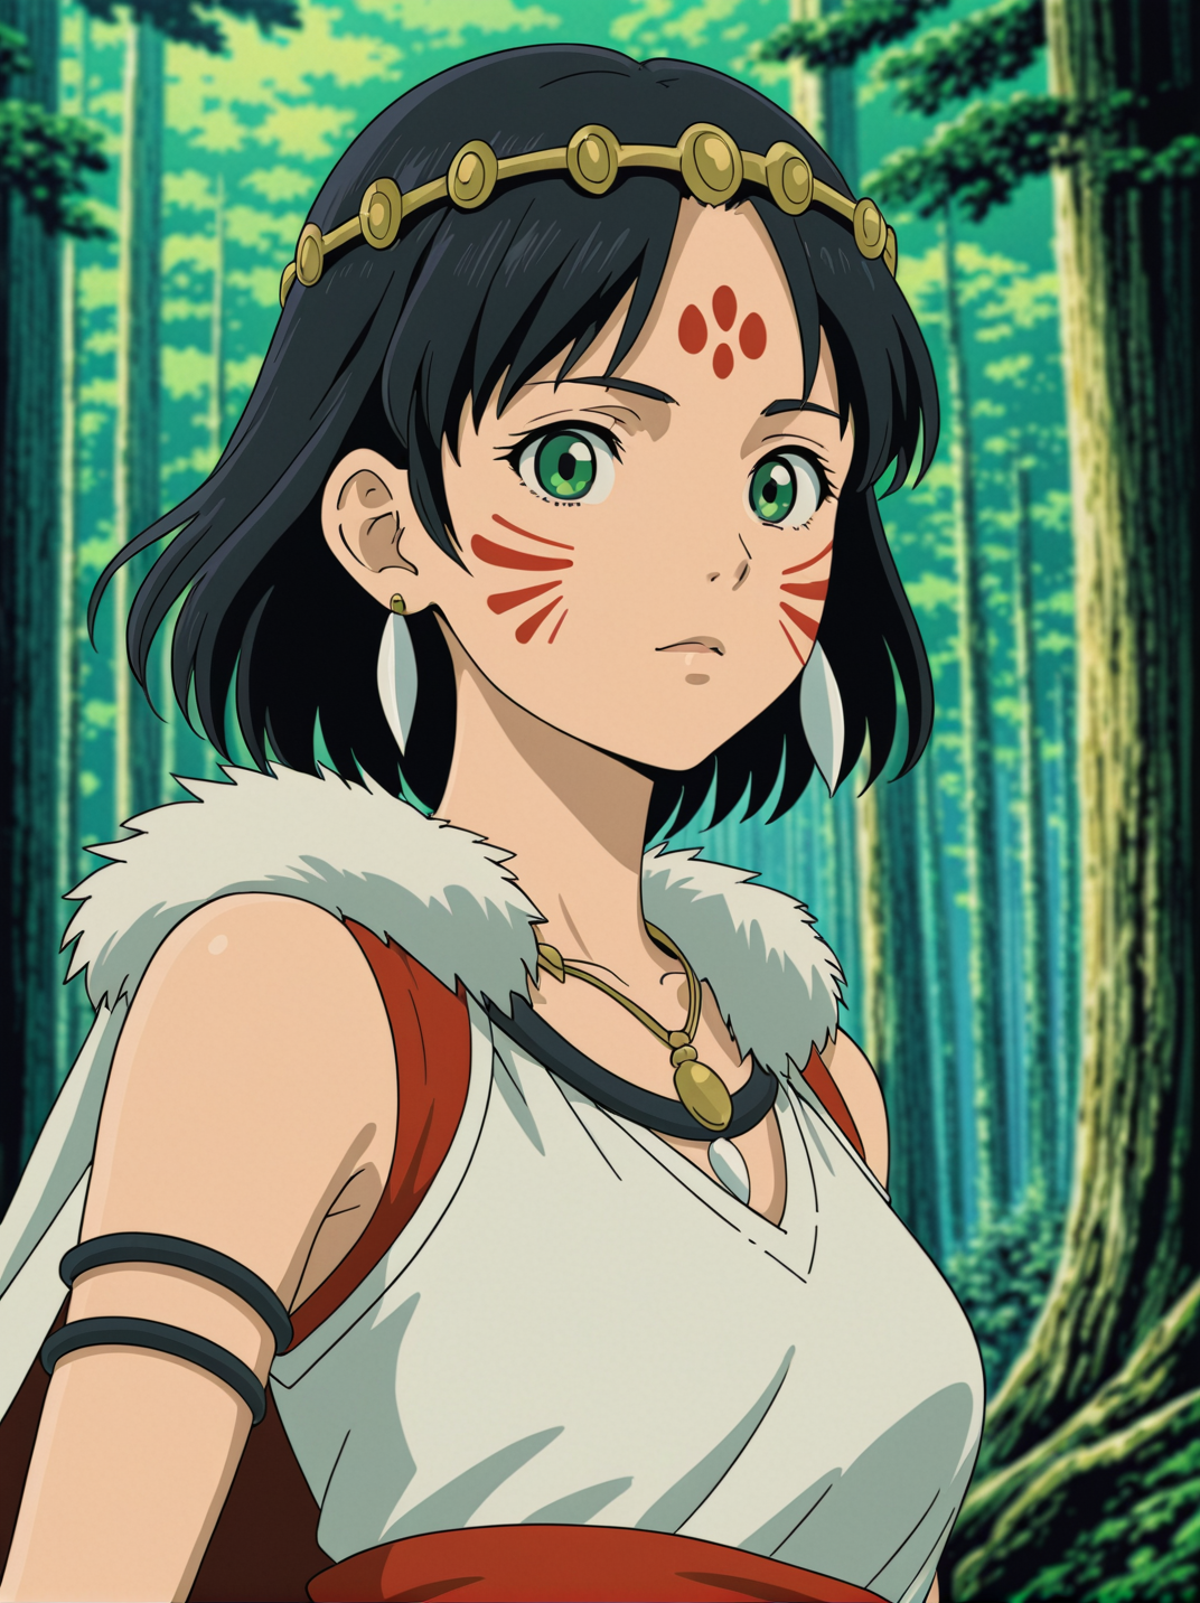 Anime character wearing a white dress and red paint on her face.